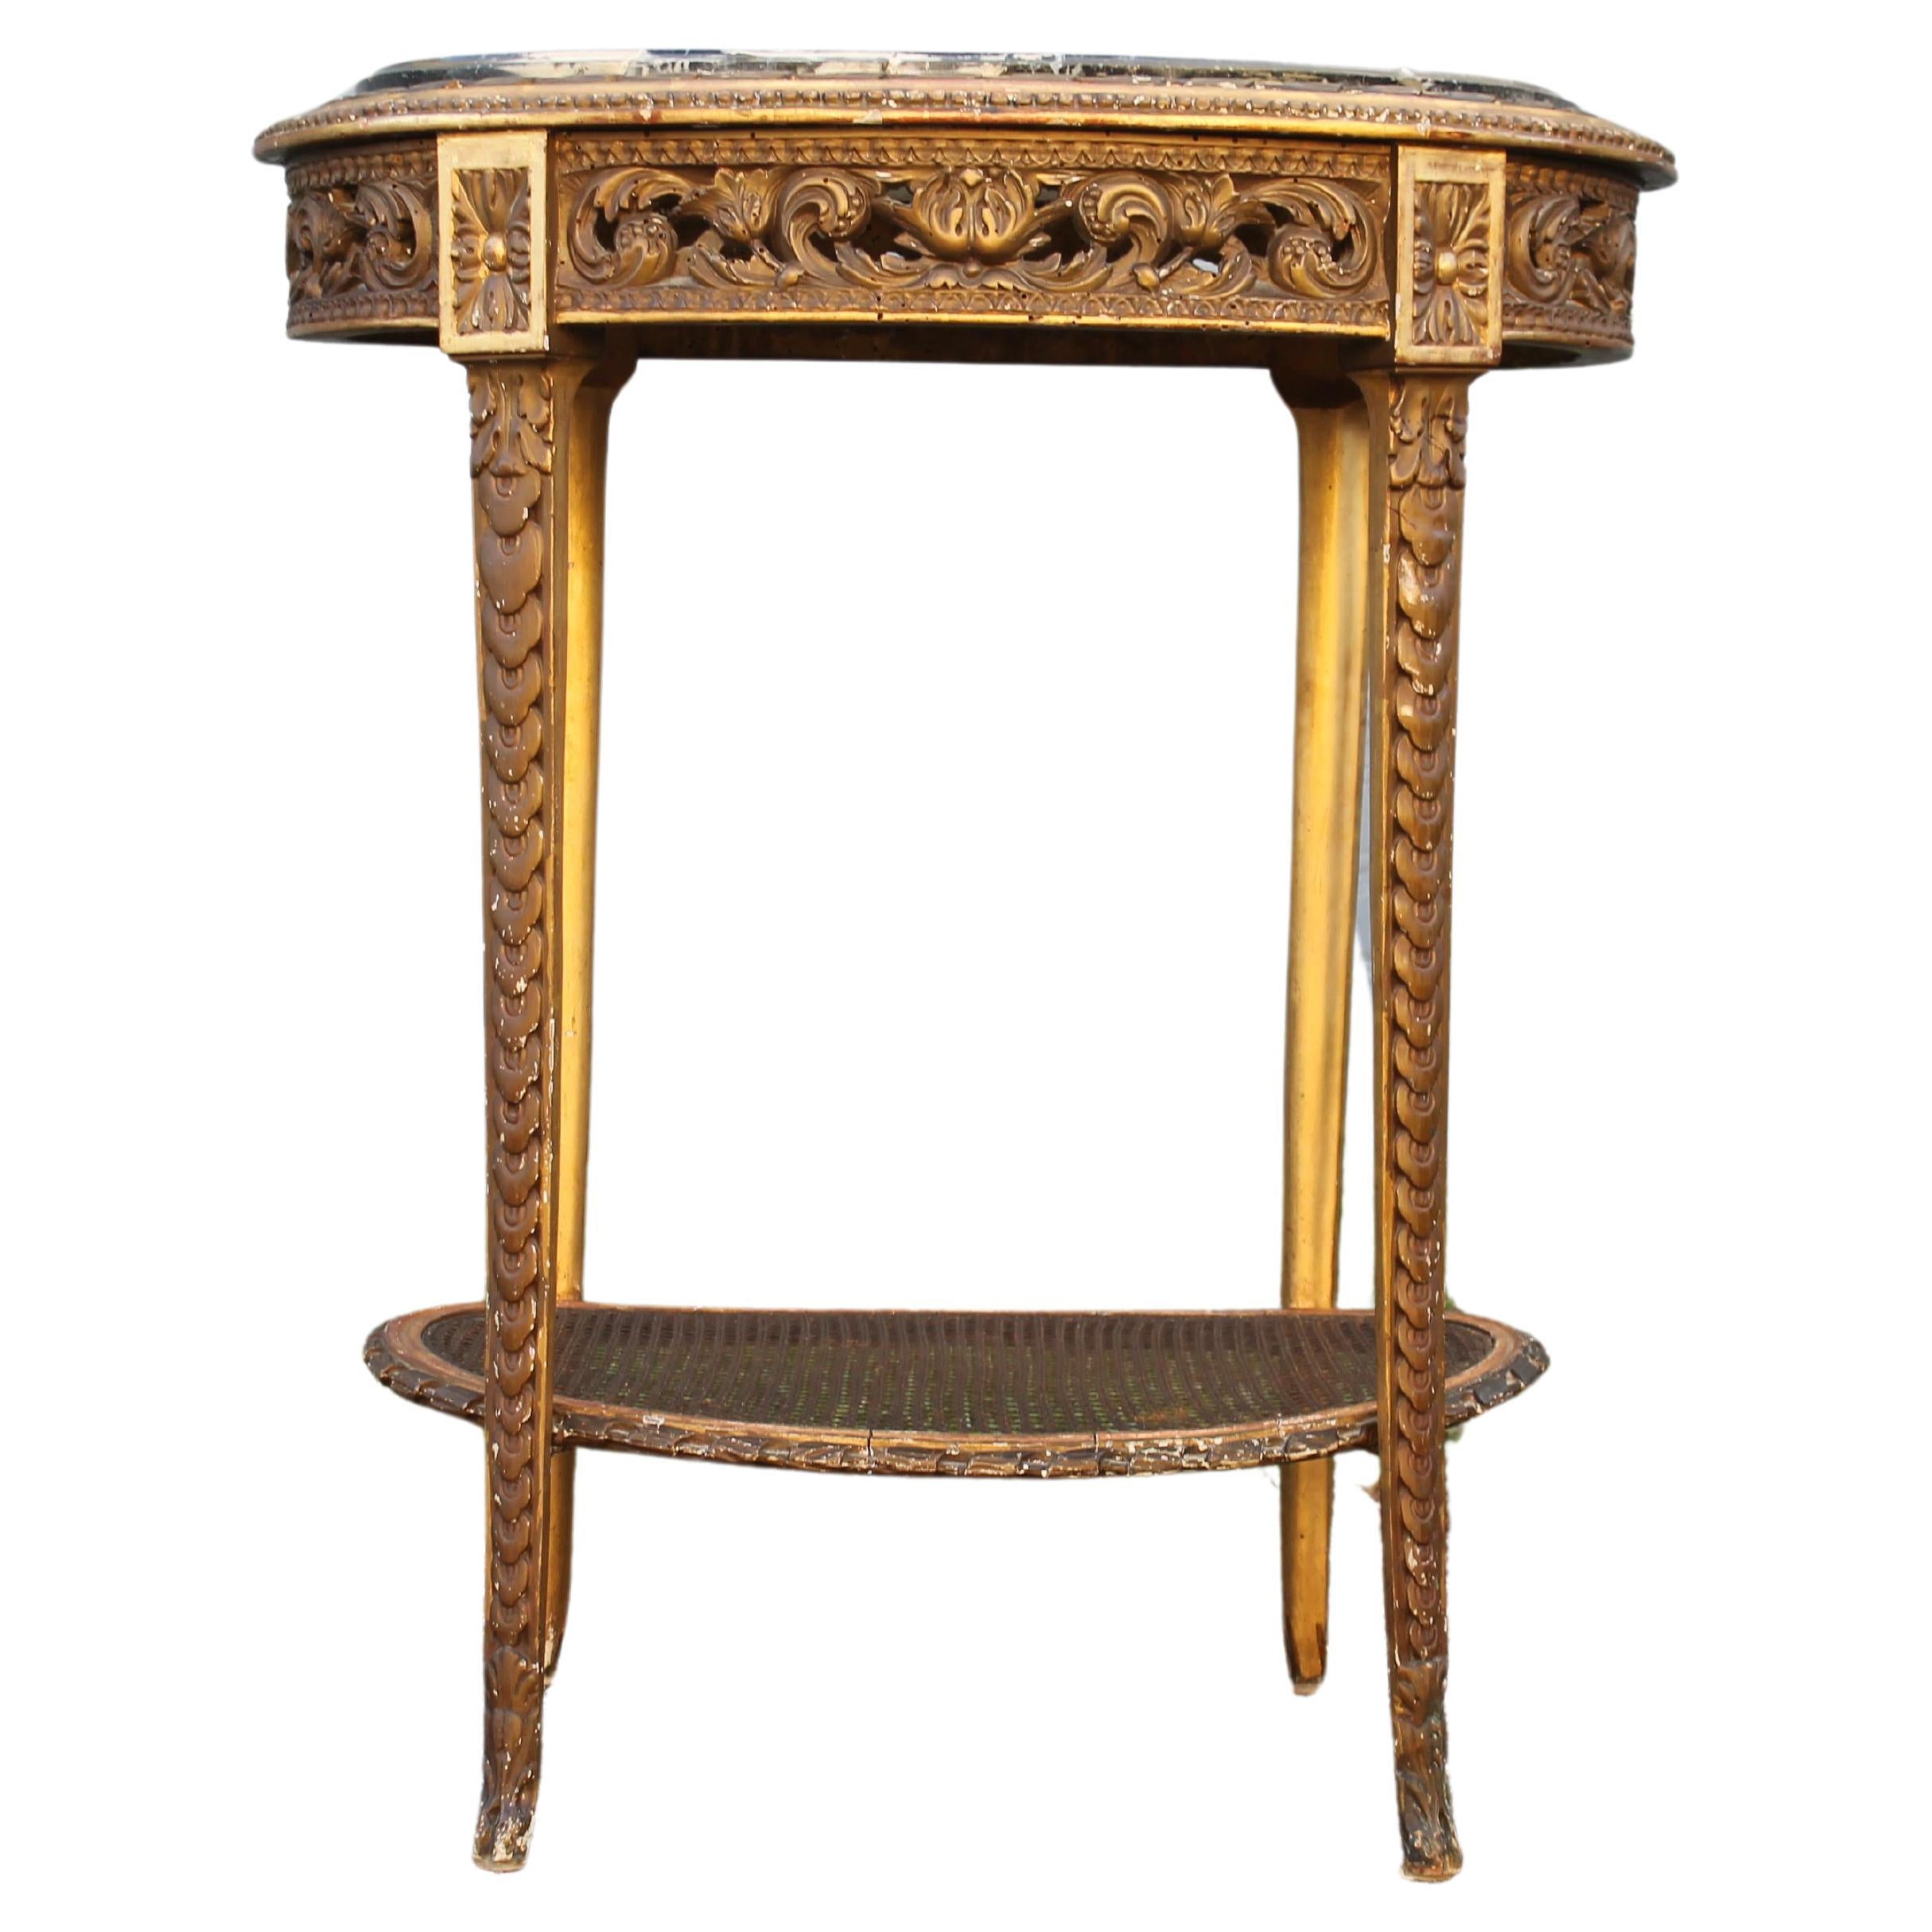 Mid 19thc French Louis XVI Heavily Carved and Gilded  Accent Table with Marble  For Sale